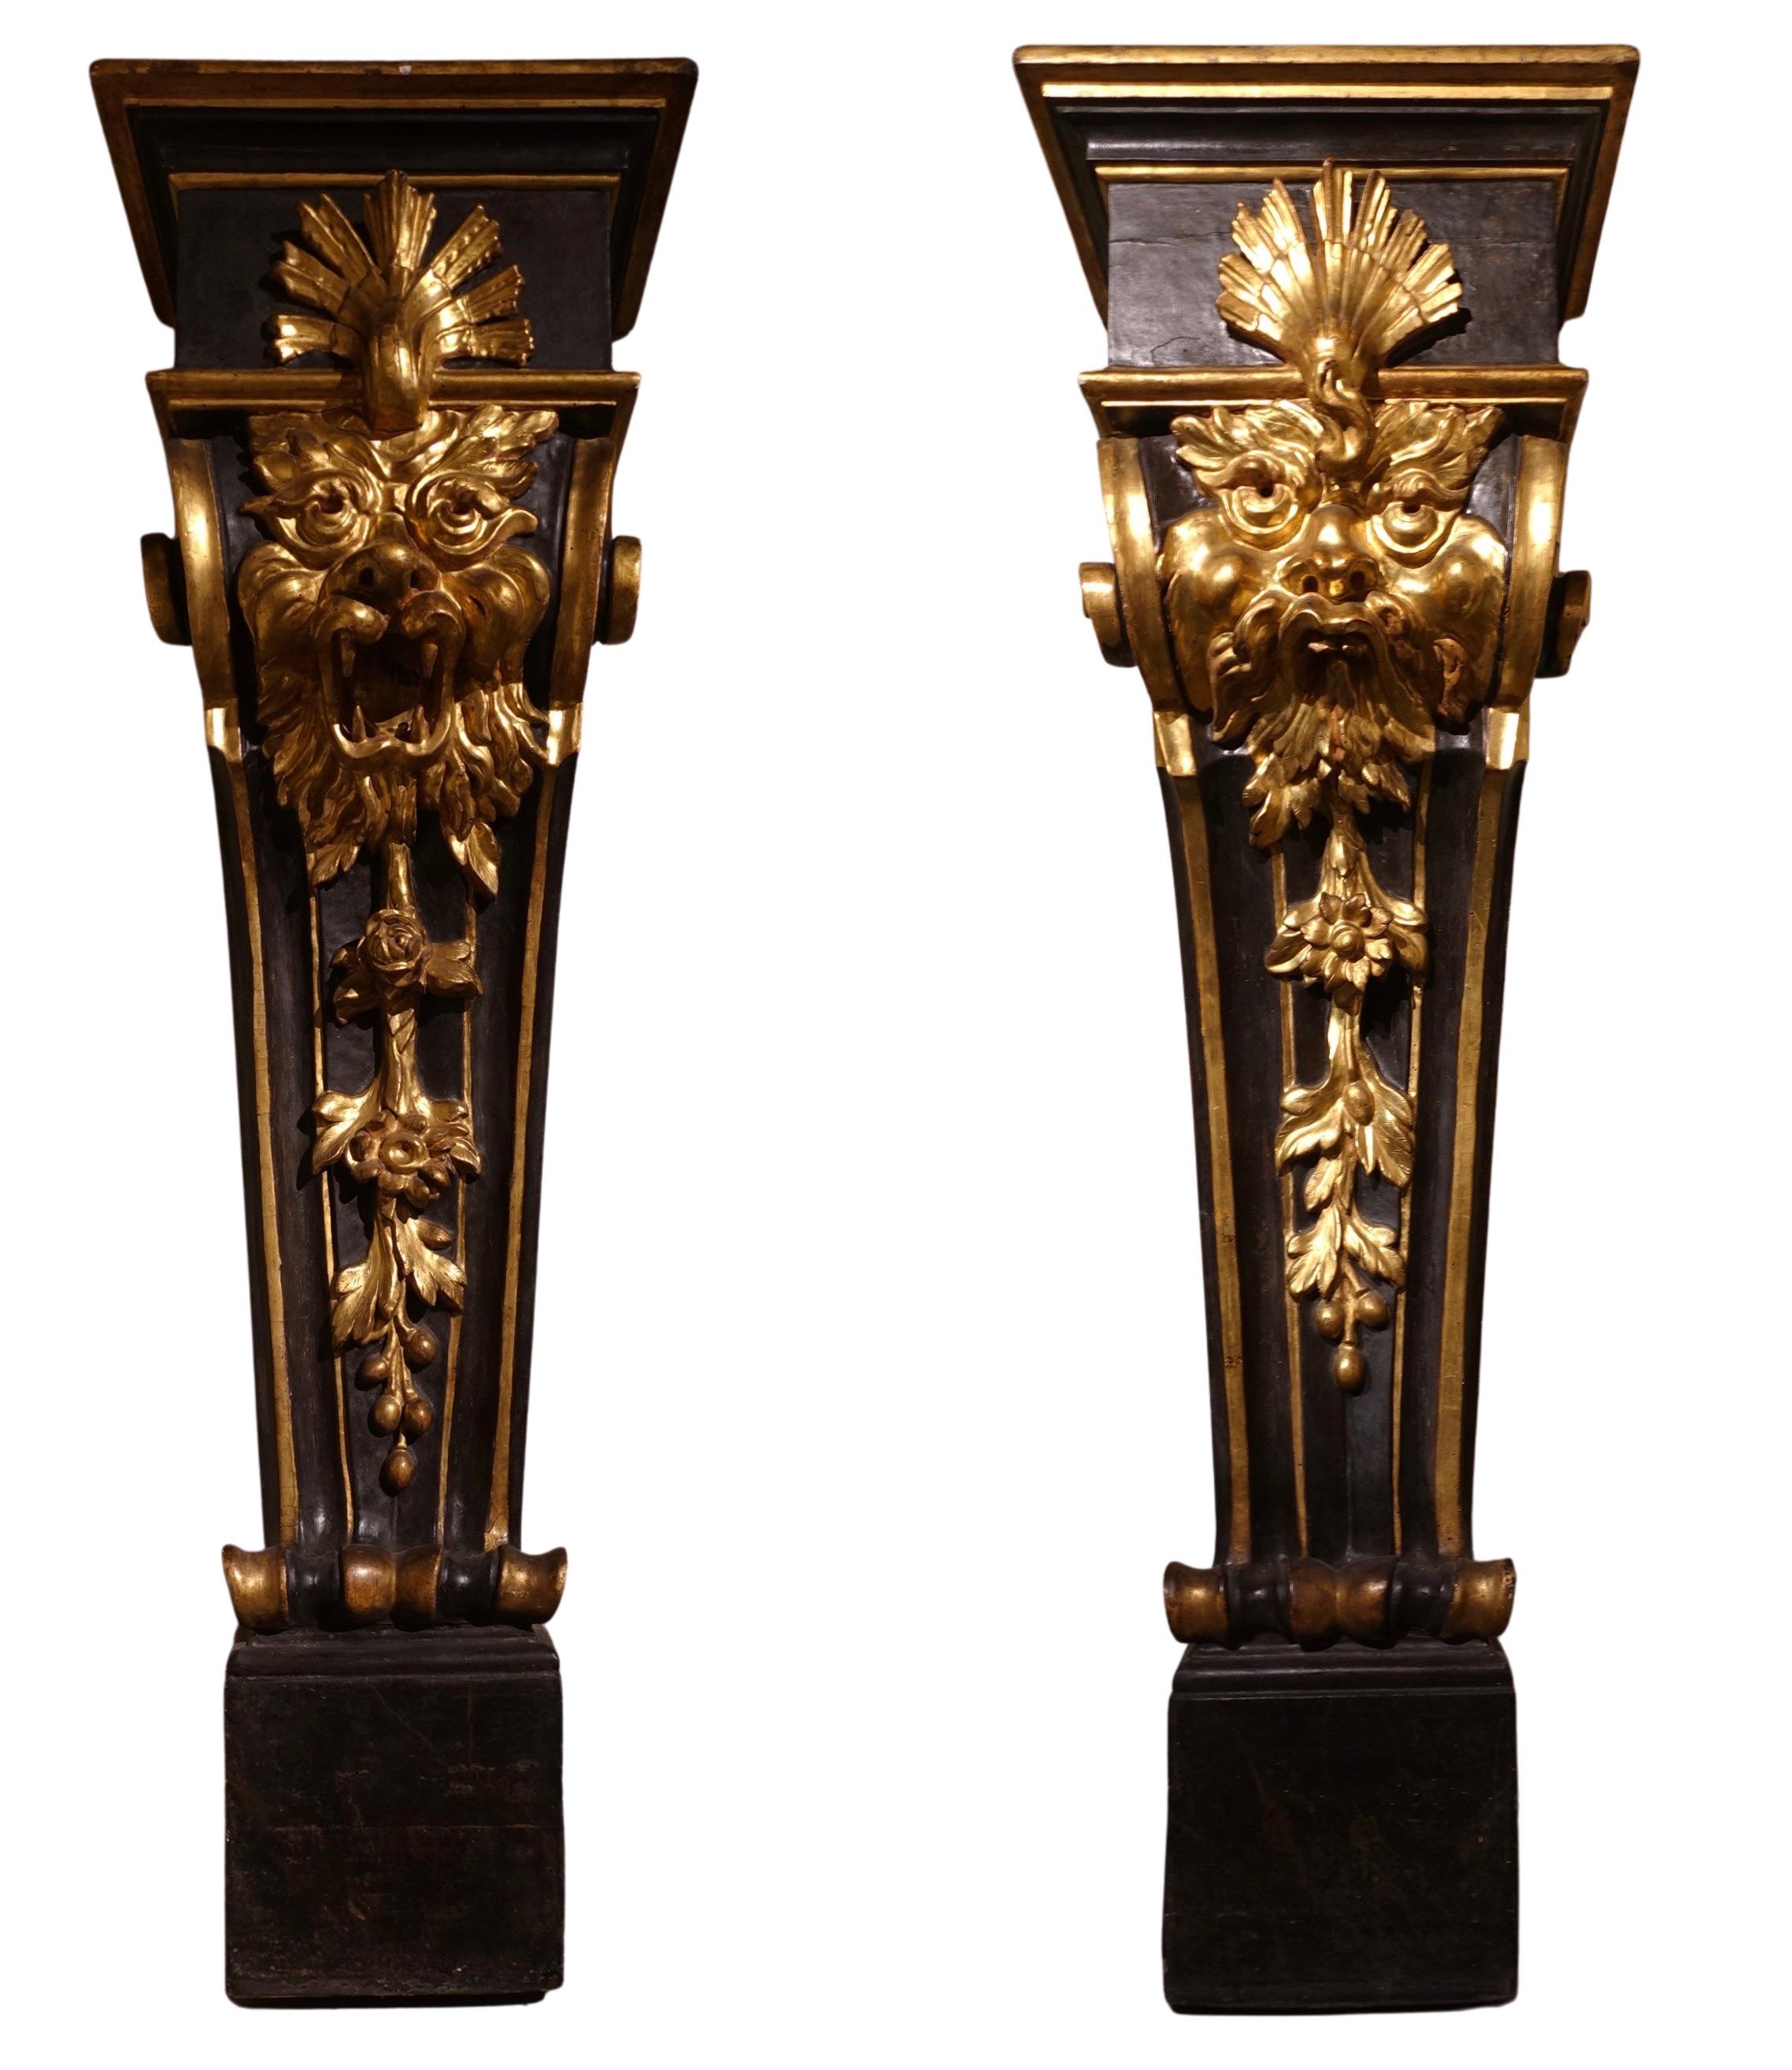 Italian Rare Pair of Pedestals Decorated with Grotesques, Florence, Early 17th Century